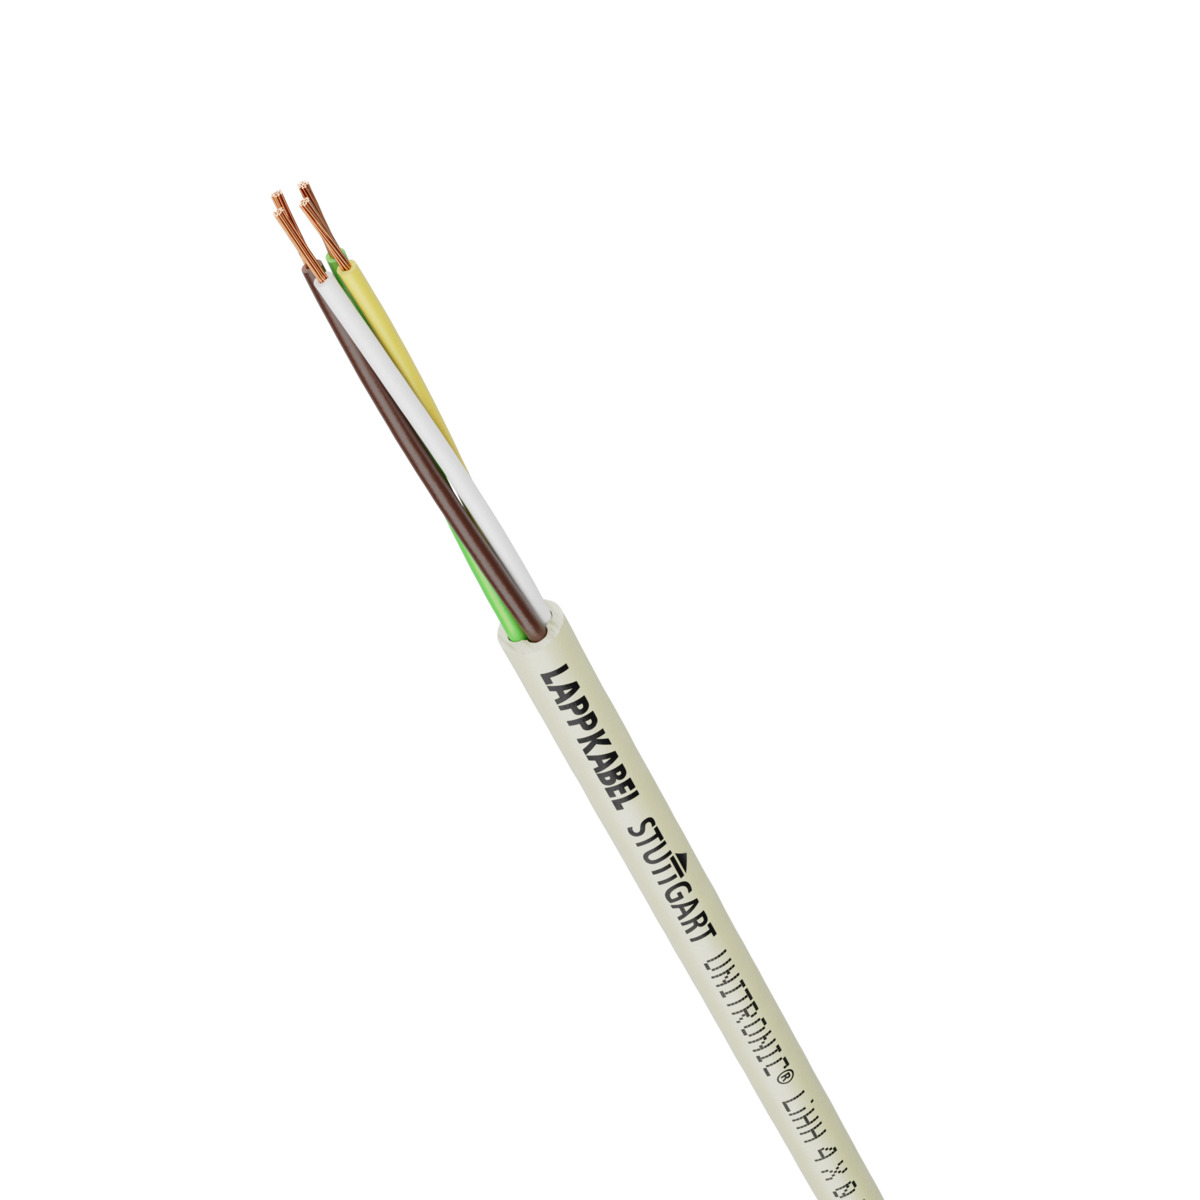 UNITRONIC® LiHH low frequency data transmission cable